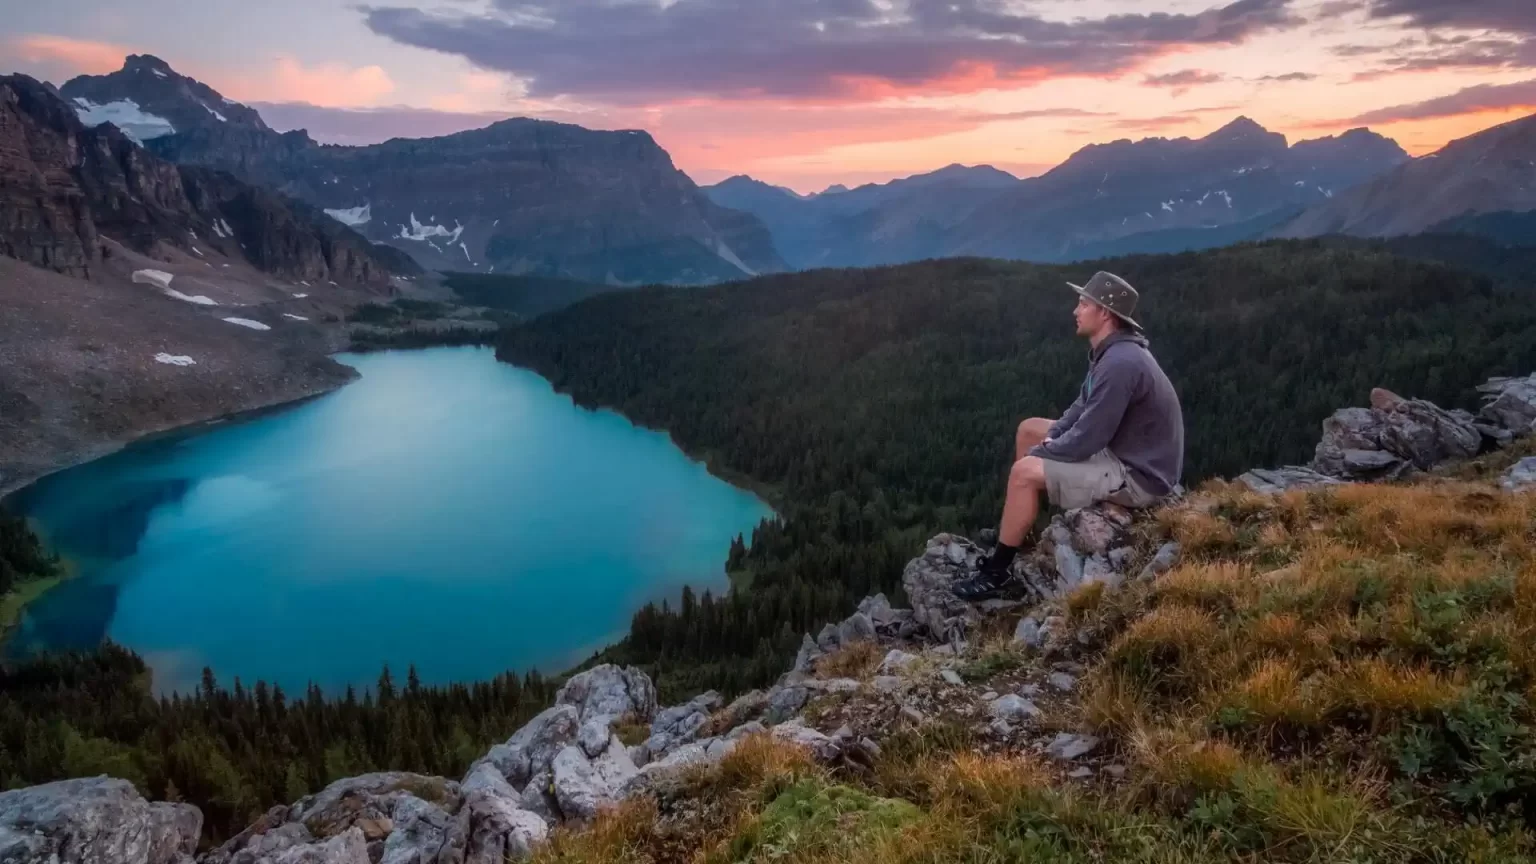 A person sitting on a mountain overlooking a lake, forest, other mountains and a sunset